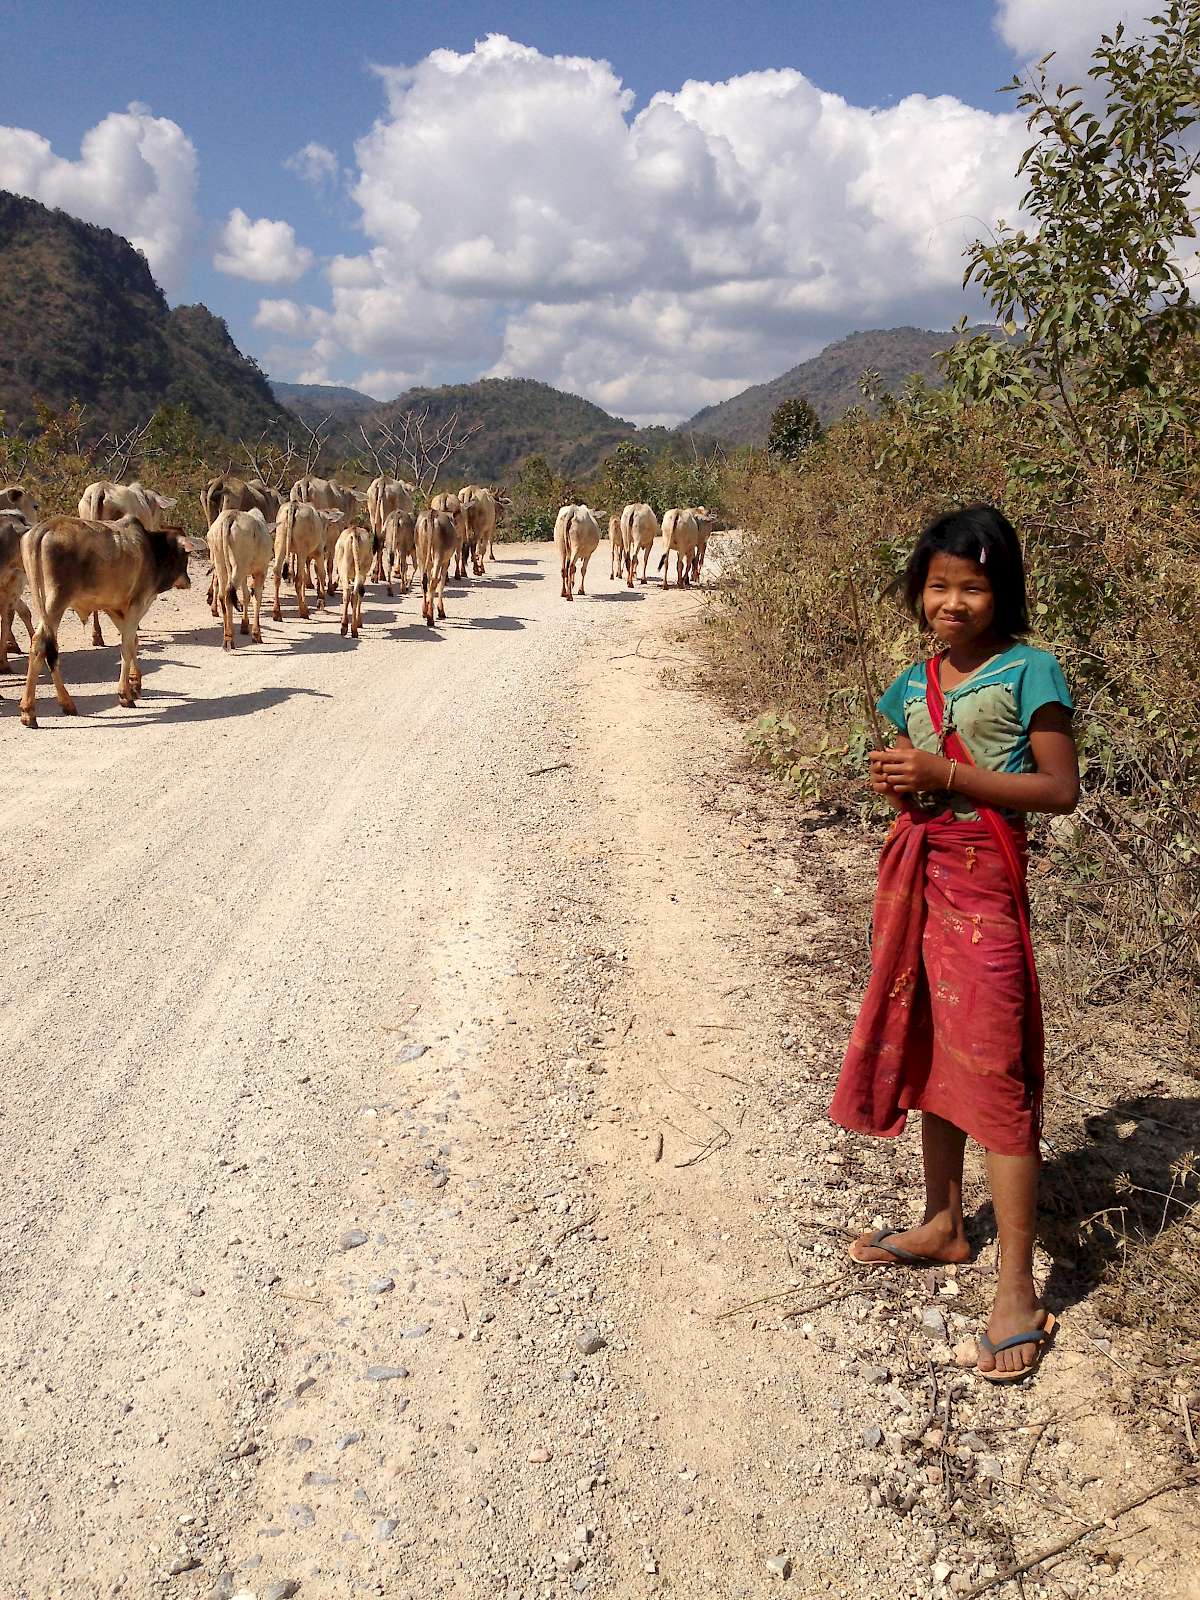 Typical road in Burma.